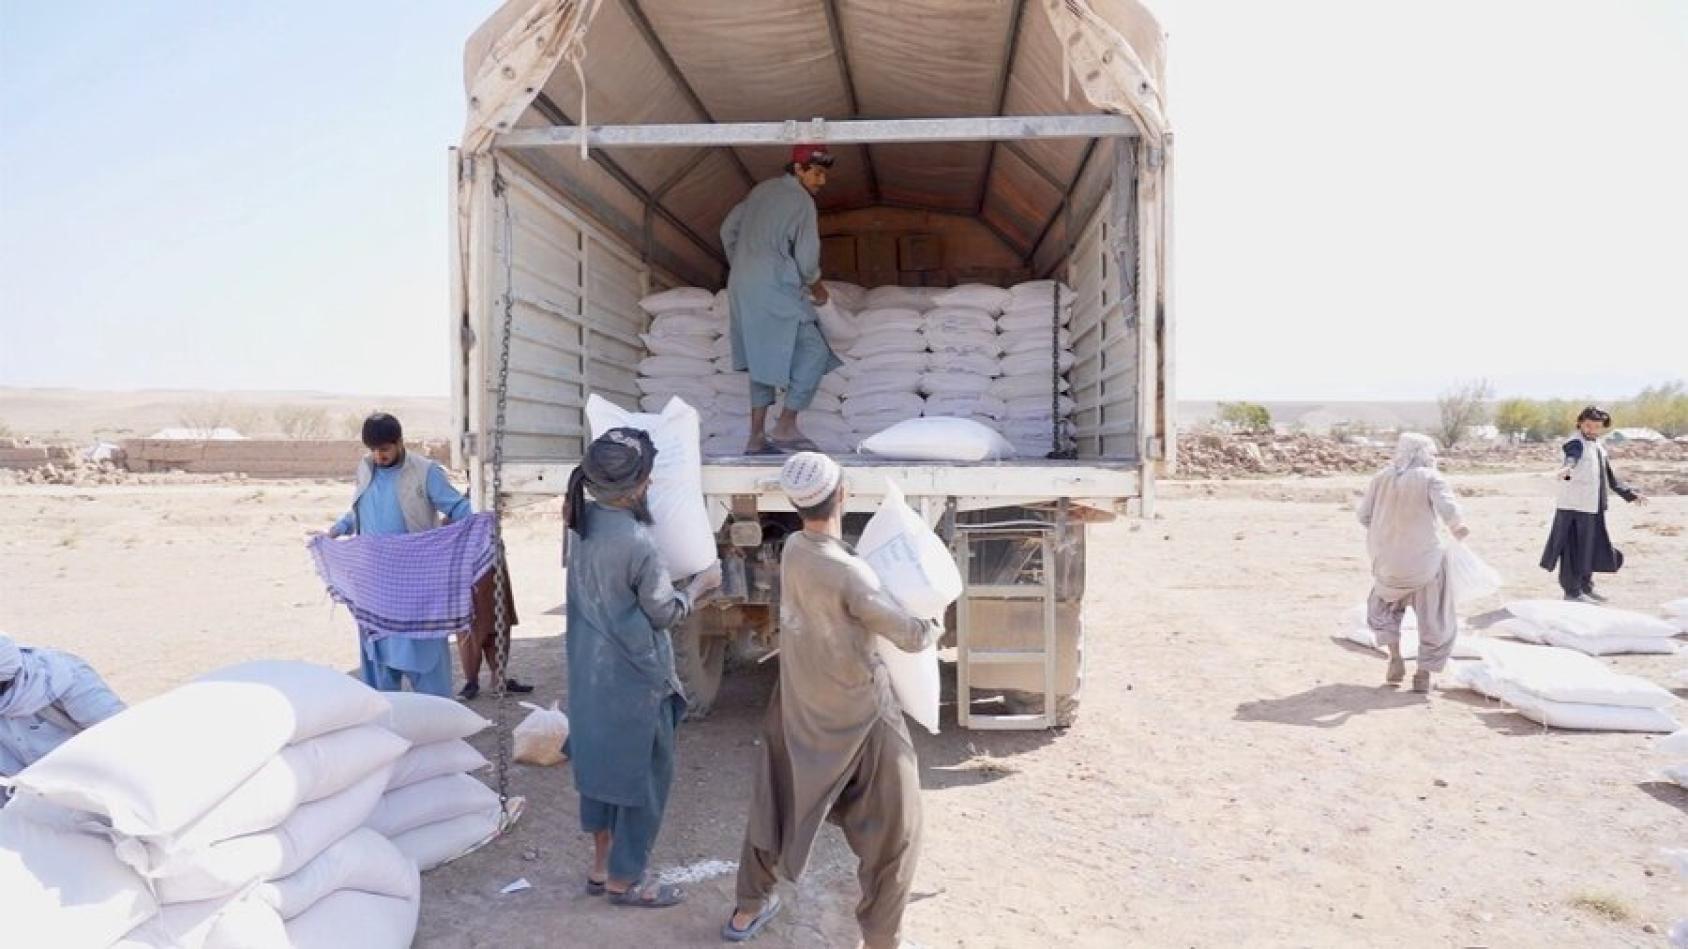 A group of men unload aid supplies from a truck in Herat, Afghanistan